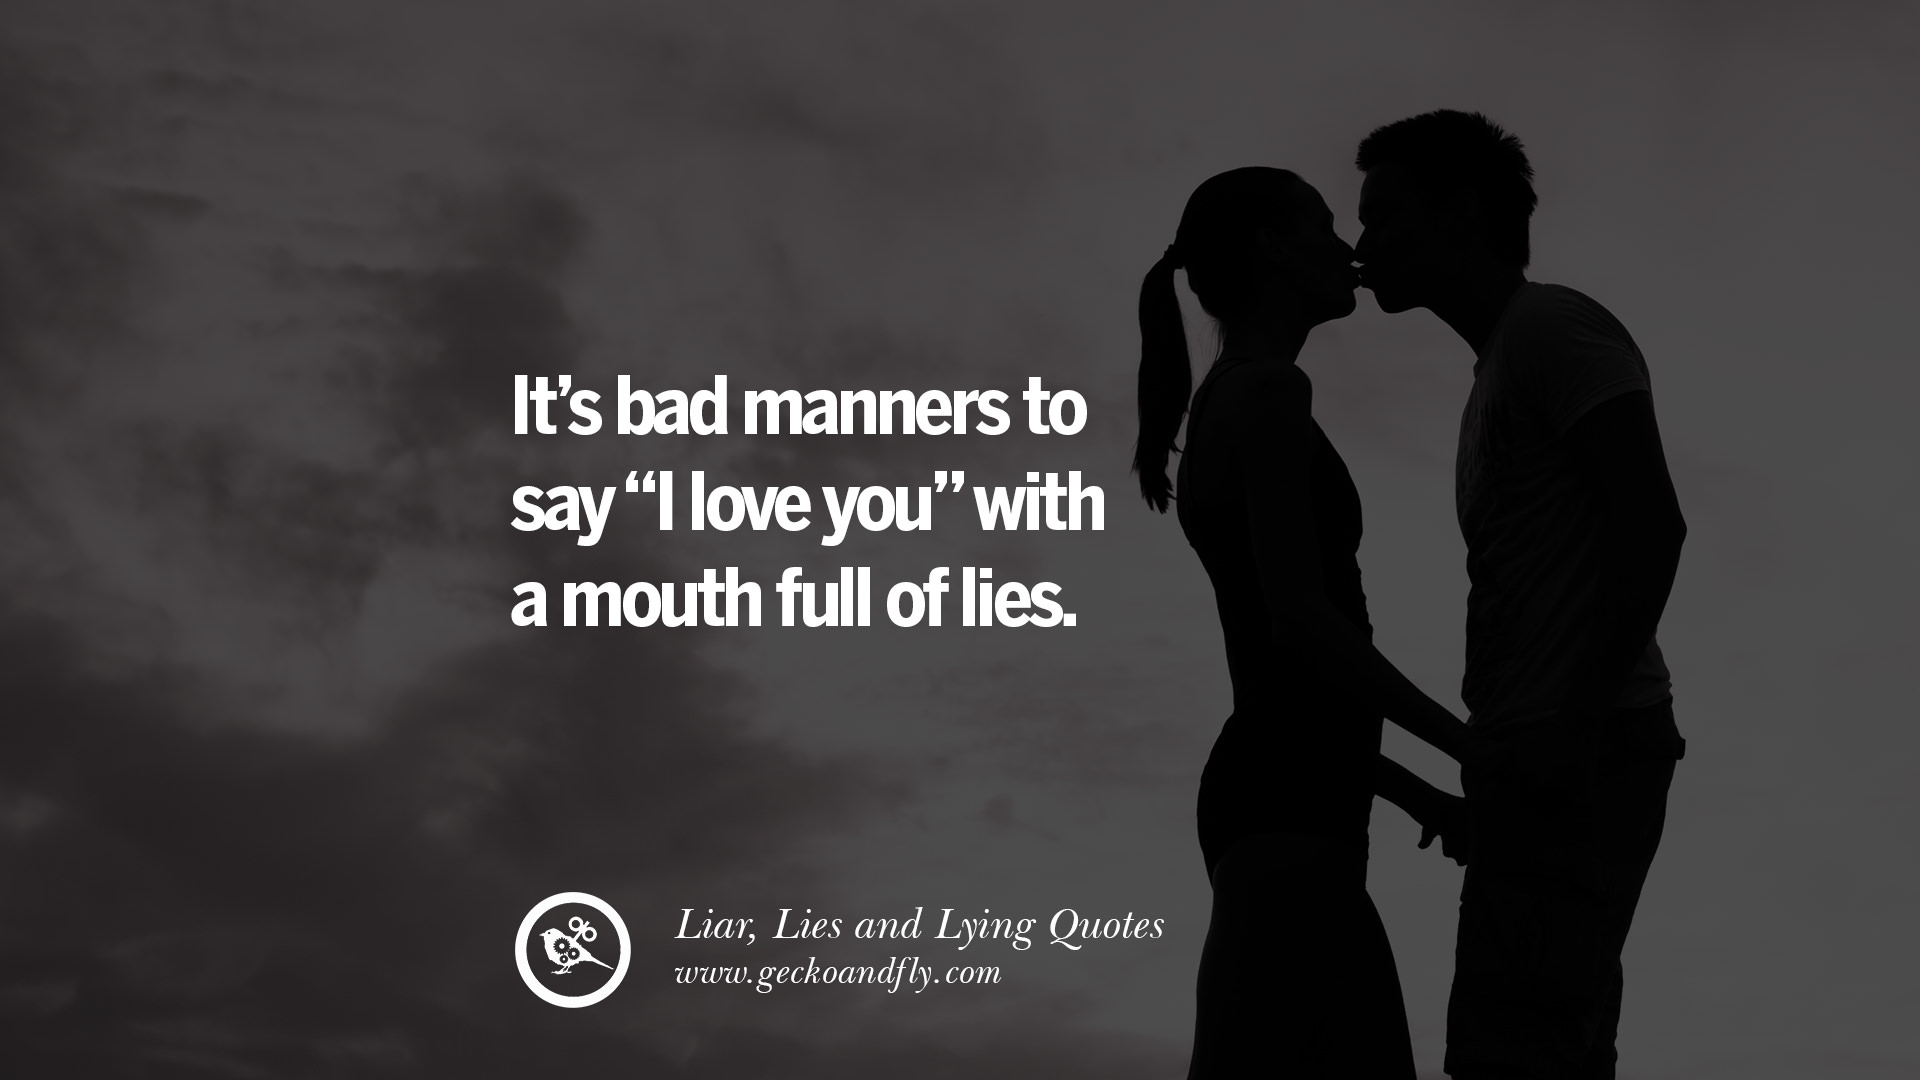 Quotes of a liar